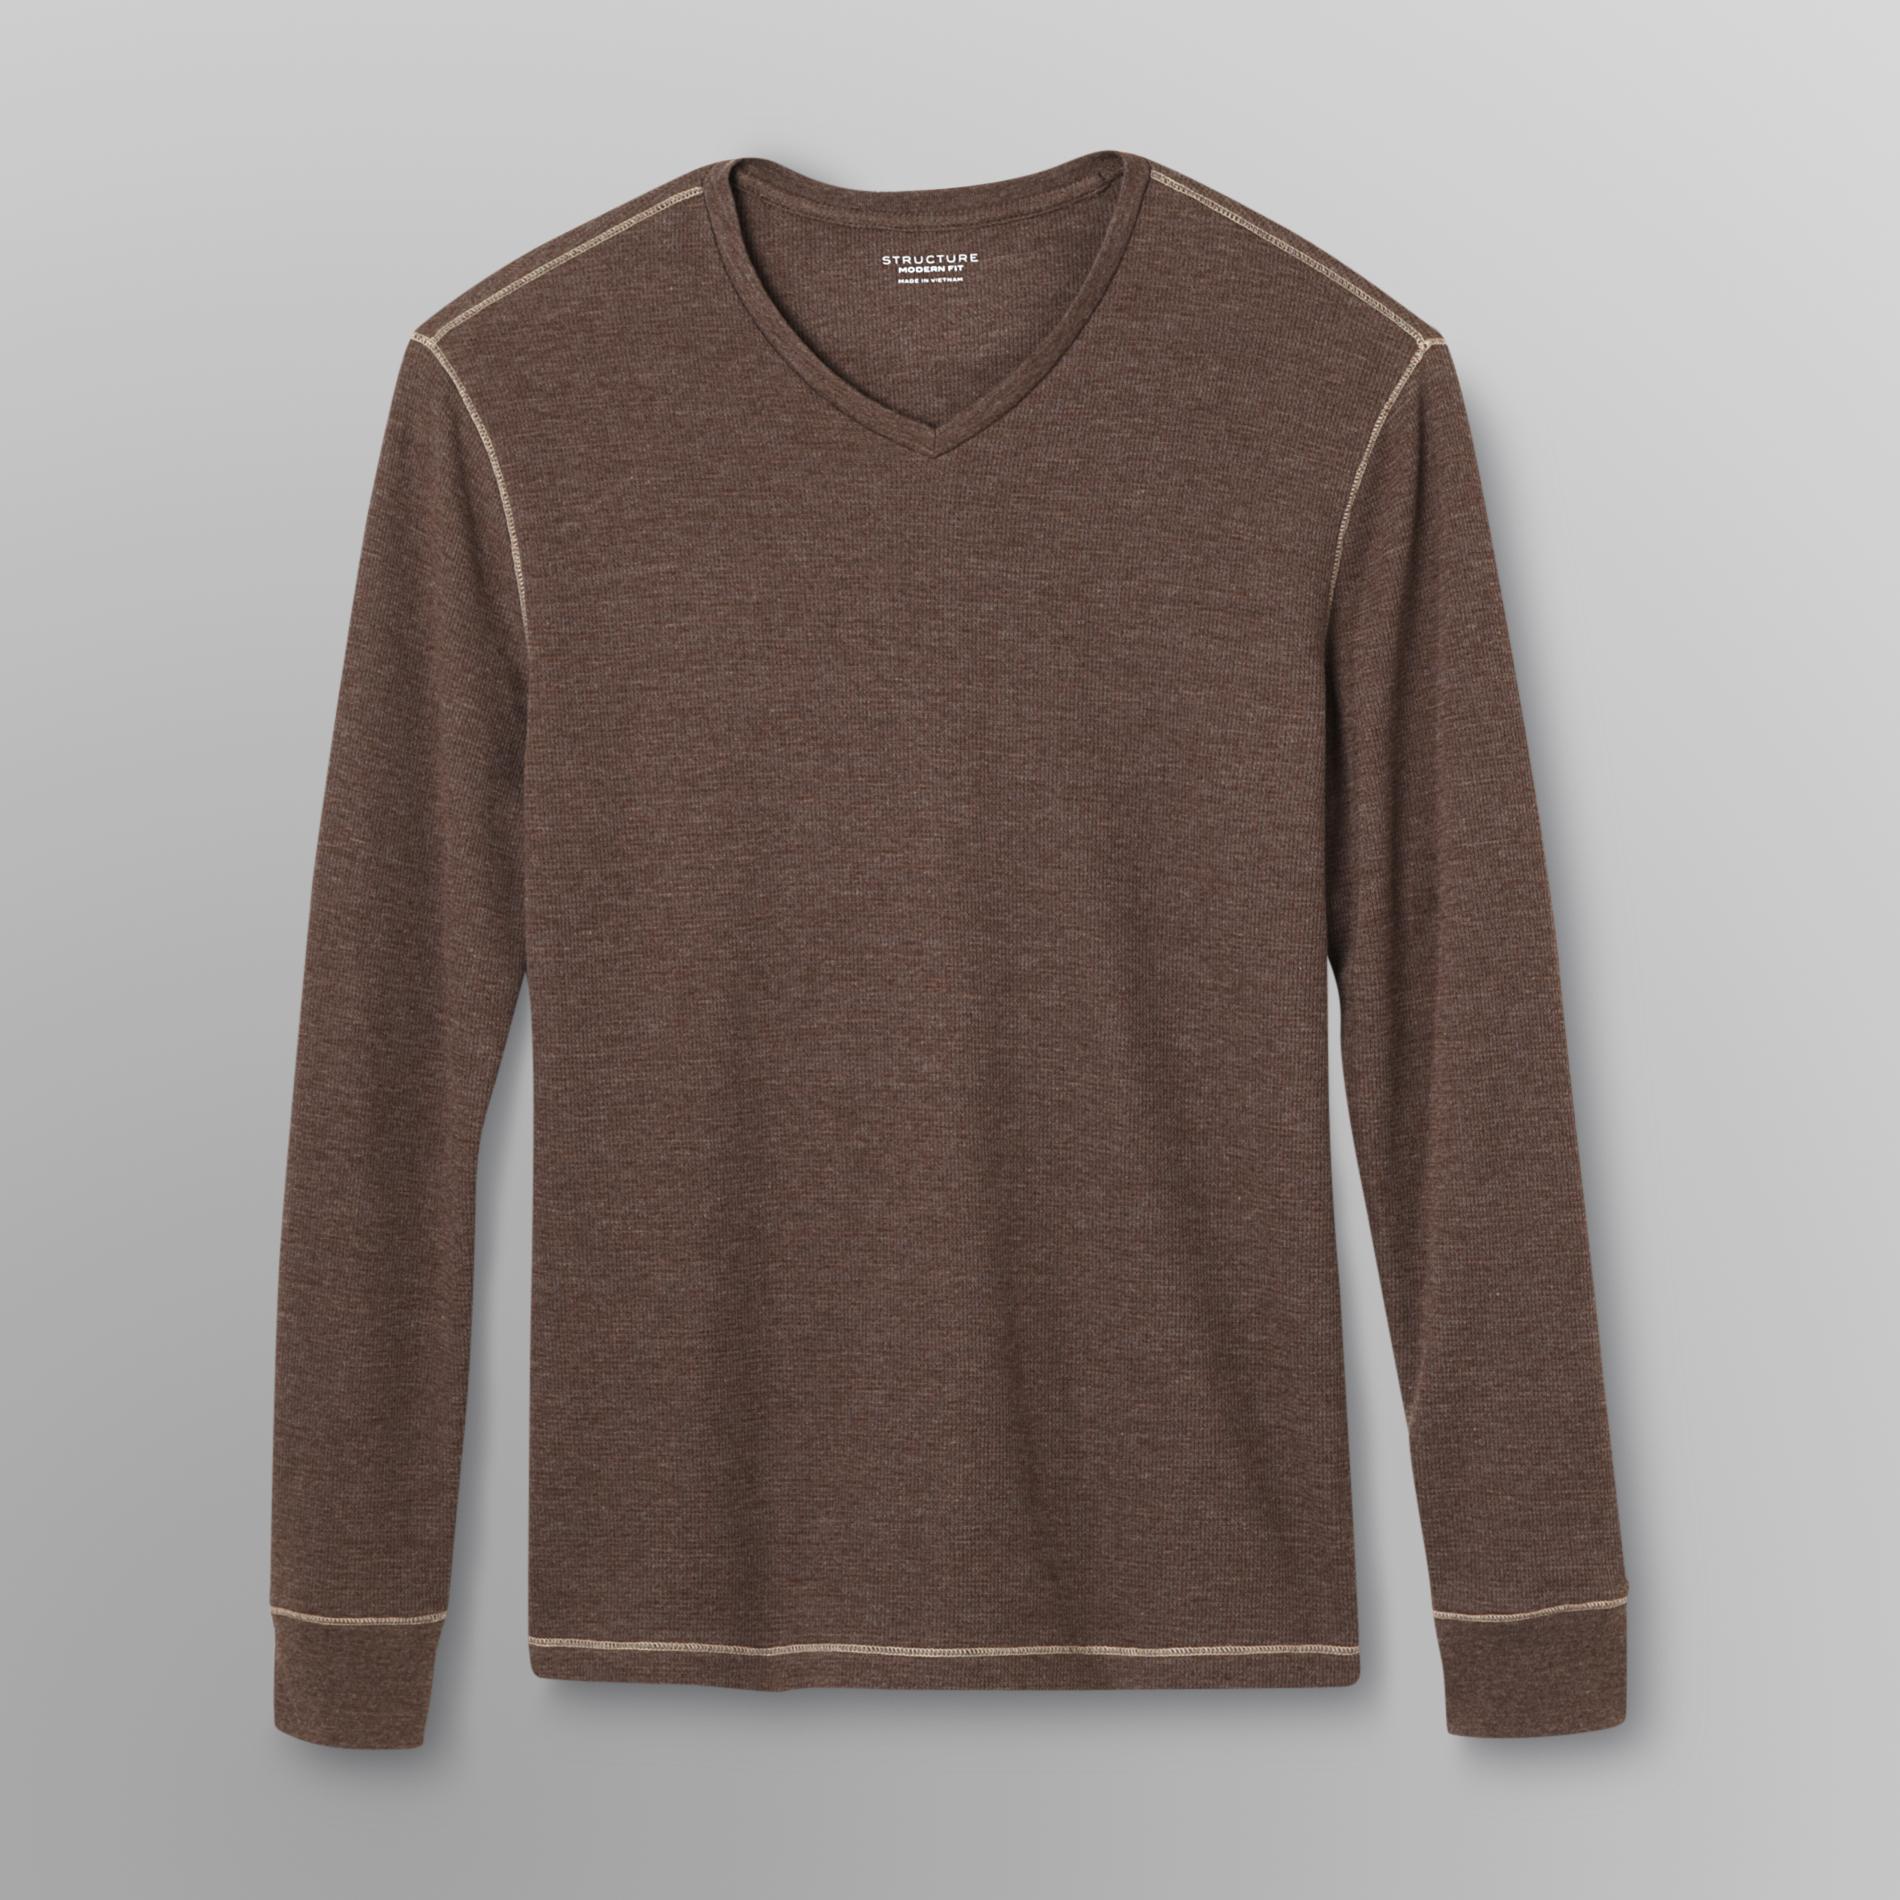 Structure Men's V-Neck Heathered Thermal Shirt